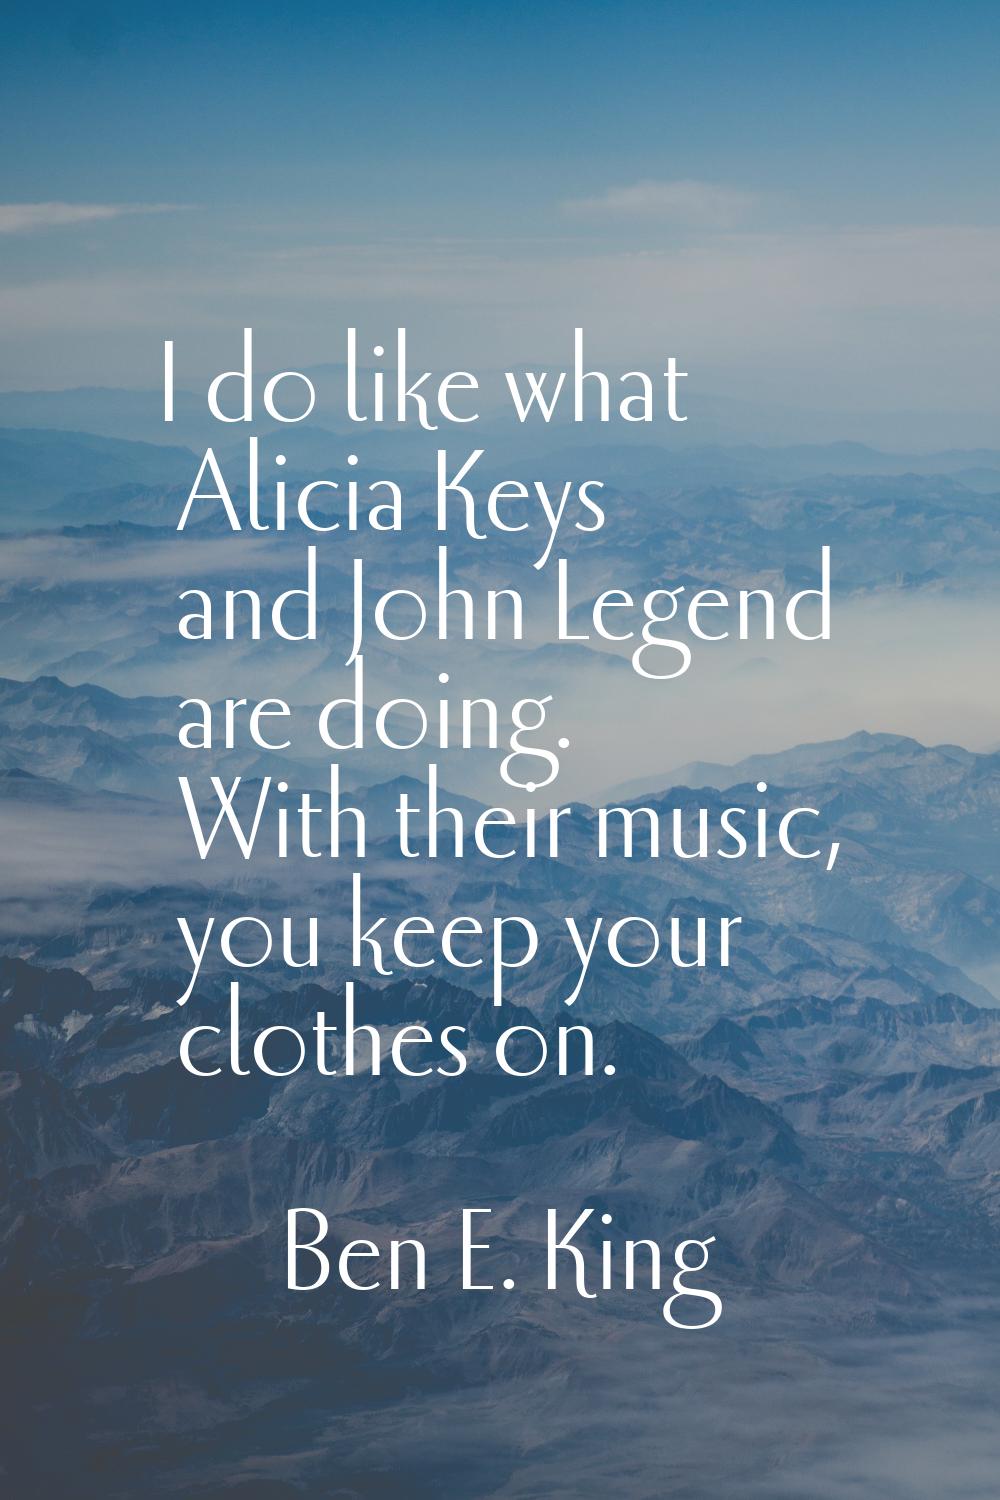 I do like what Alicia Keys and John Legend are doing. With their music, you keep your clothes on.